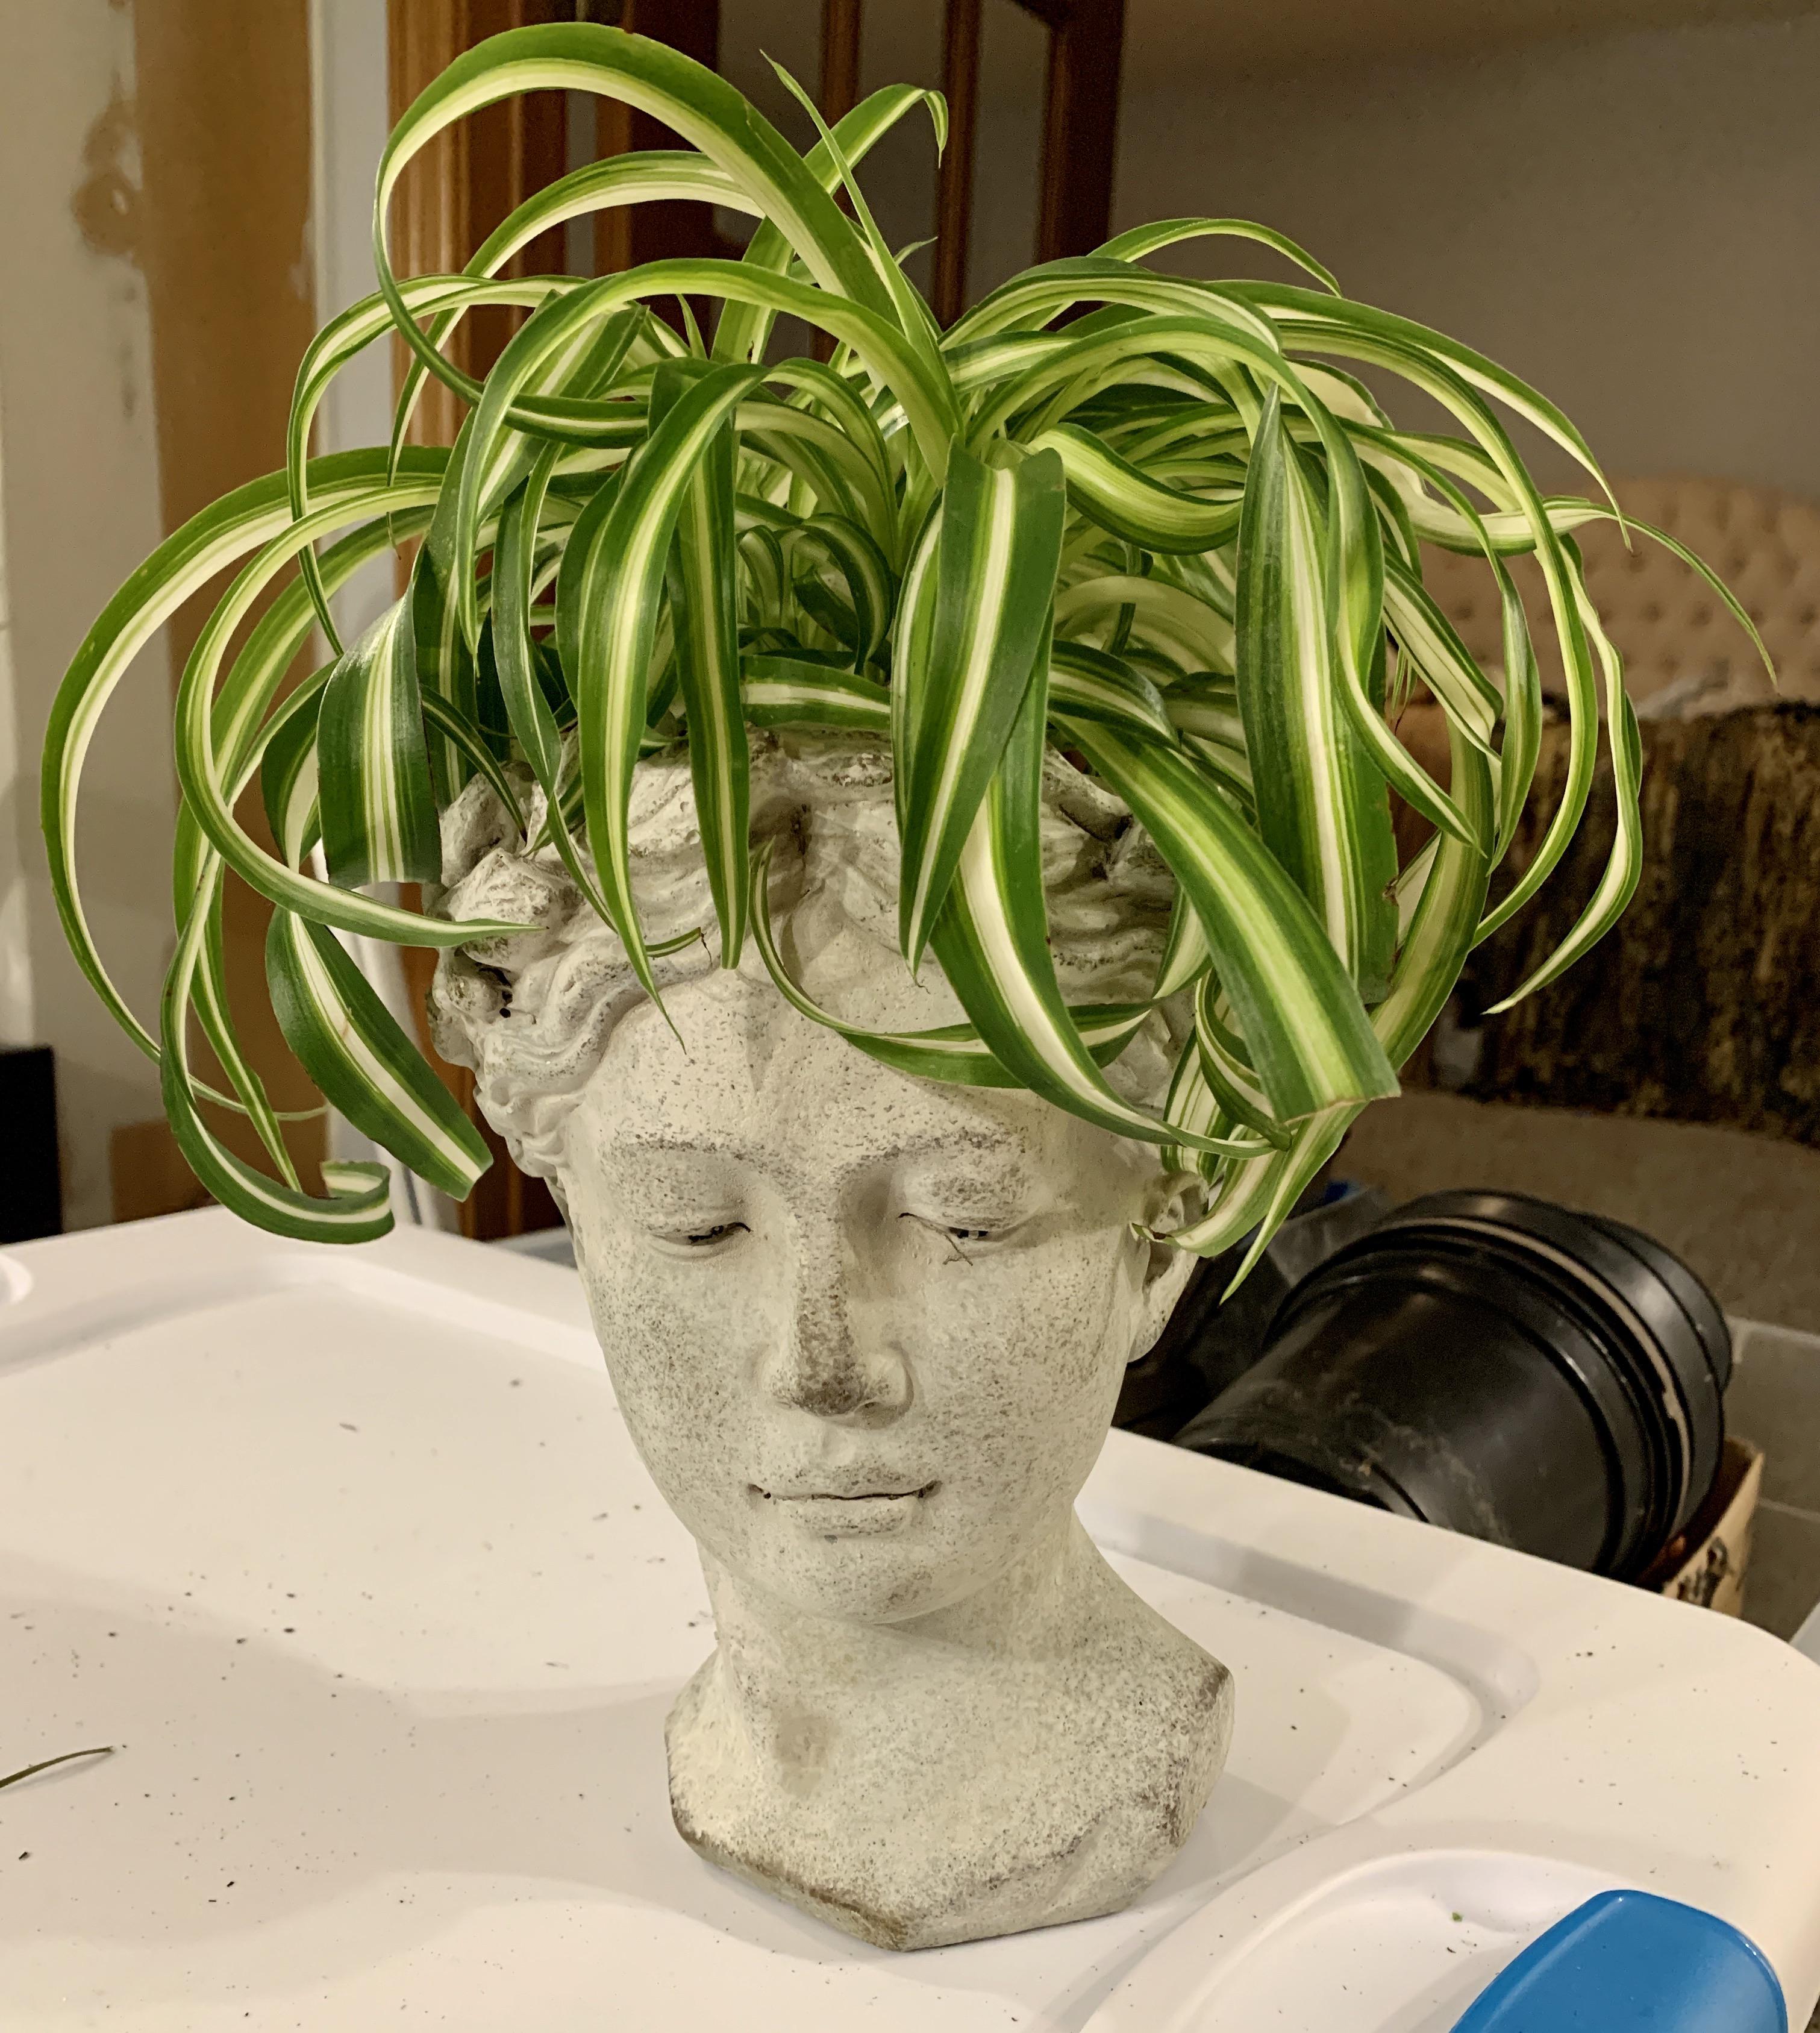 A head with spider plant for hair